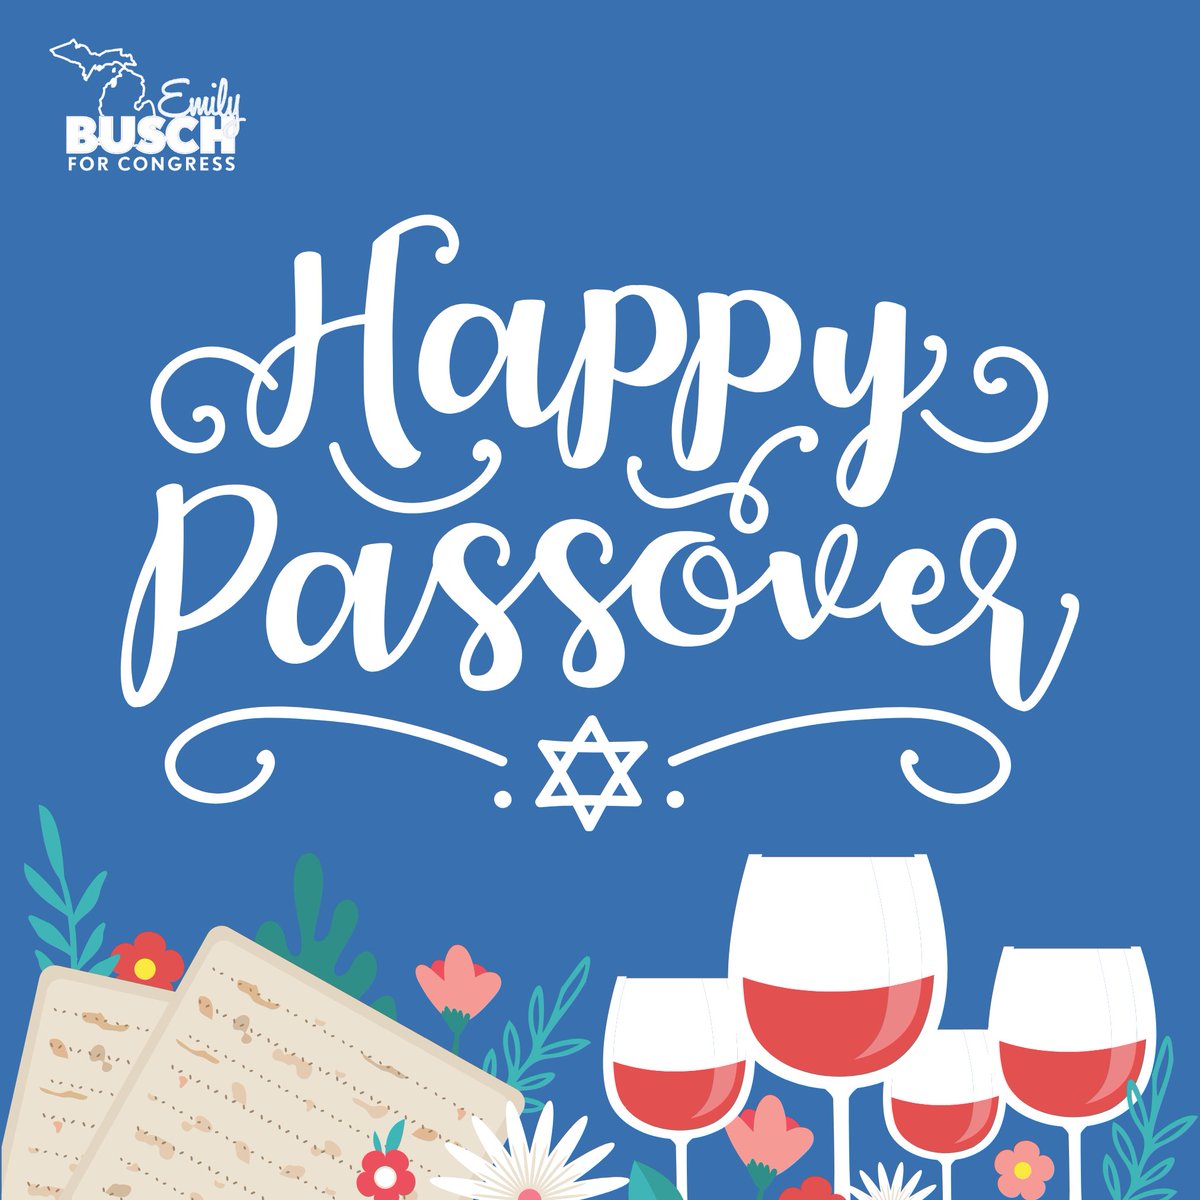 Wishing you a joyful Passover from Team Emily! May this holiday season bring you moments of renewal and strength. Chag Sameach!